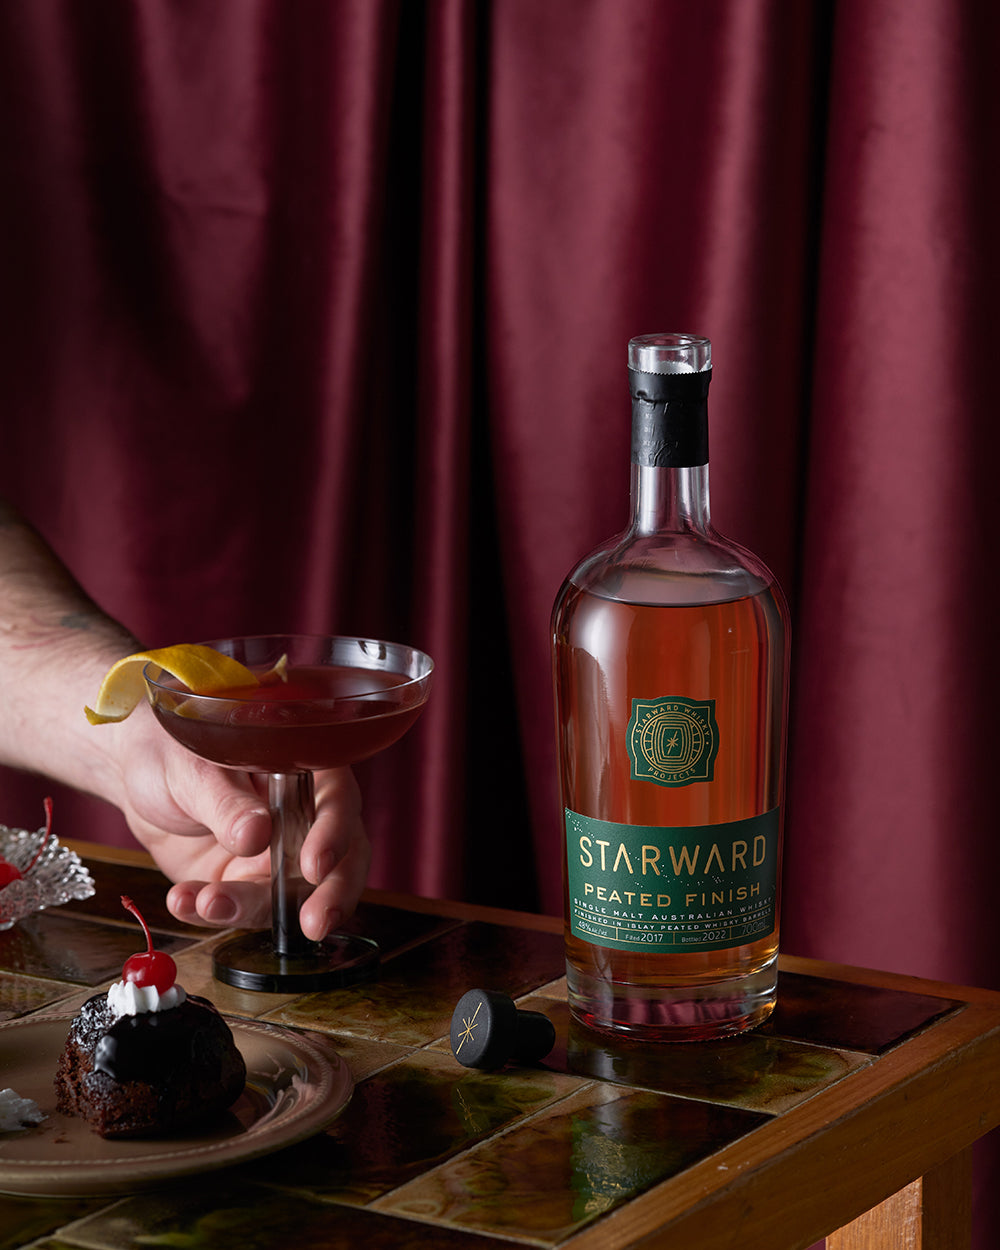 Smoke and Mirrors Cocktail using Peated Finish Whisky from Starward